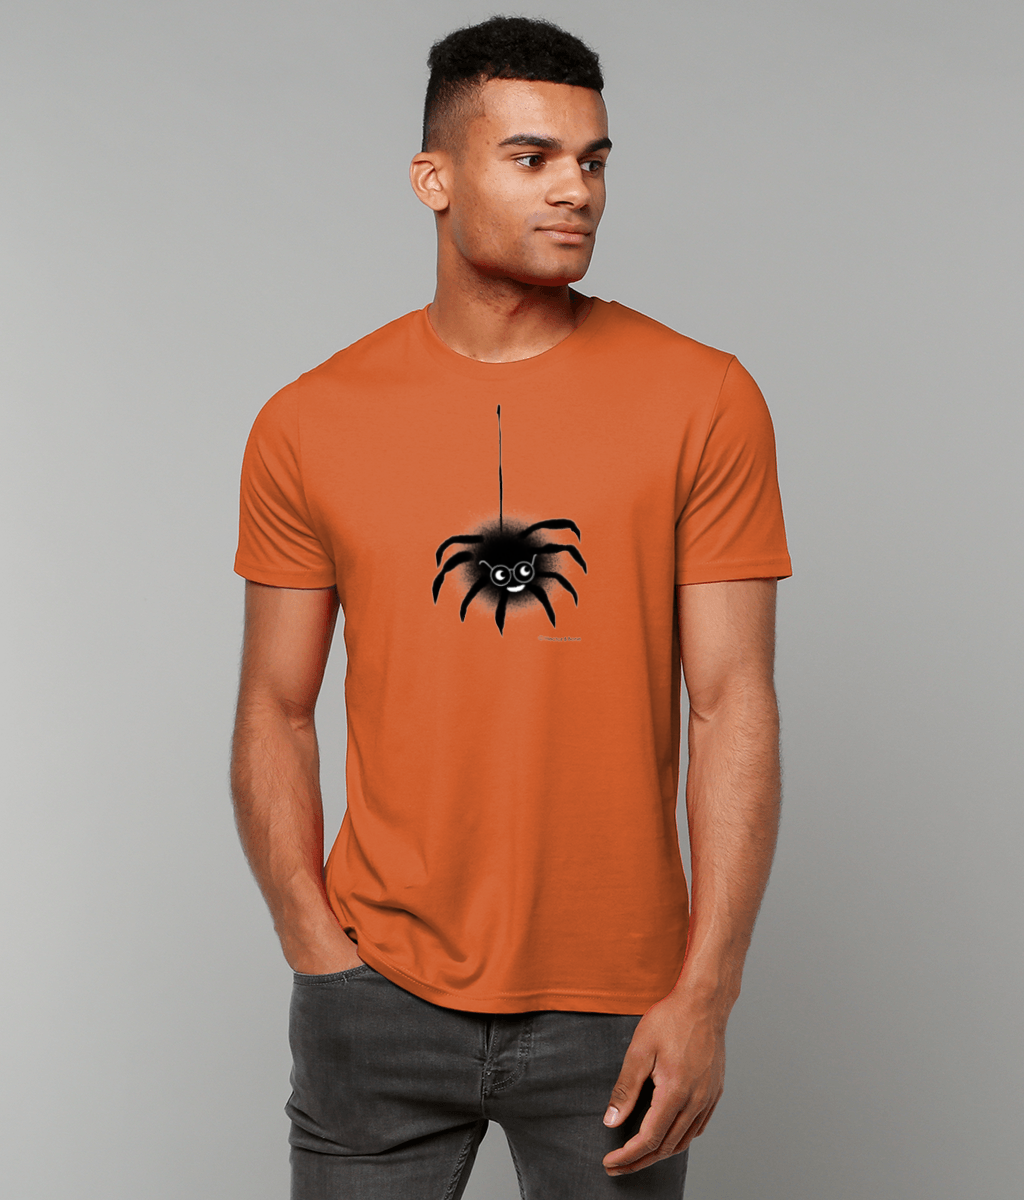 Spider T-shirt - A young man wearing a funny Spectacled Spider original illustrated Halloween design on a Hector and Bone quality vegan pumpkin orange colour cotton t-shirt